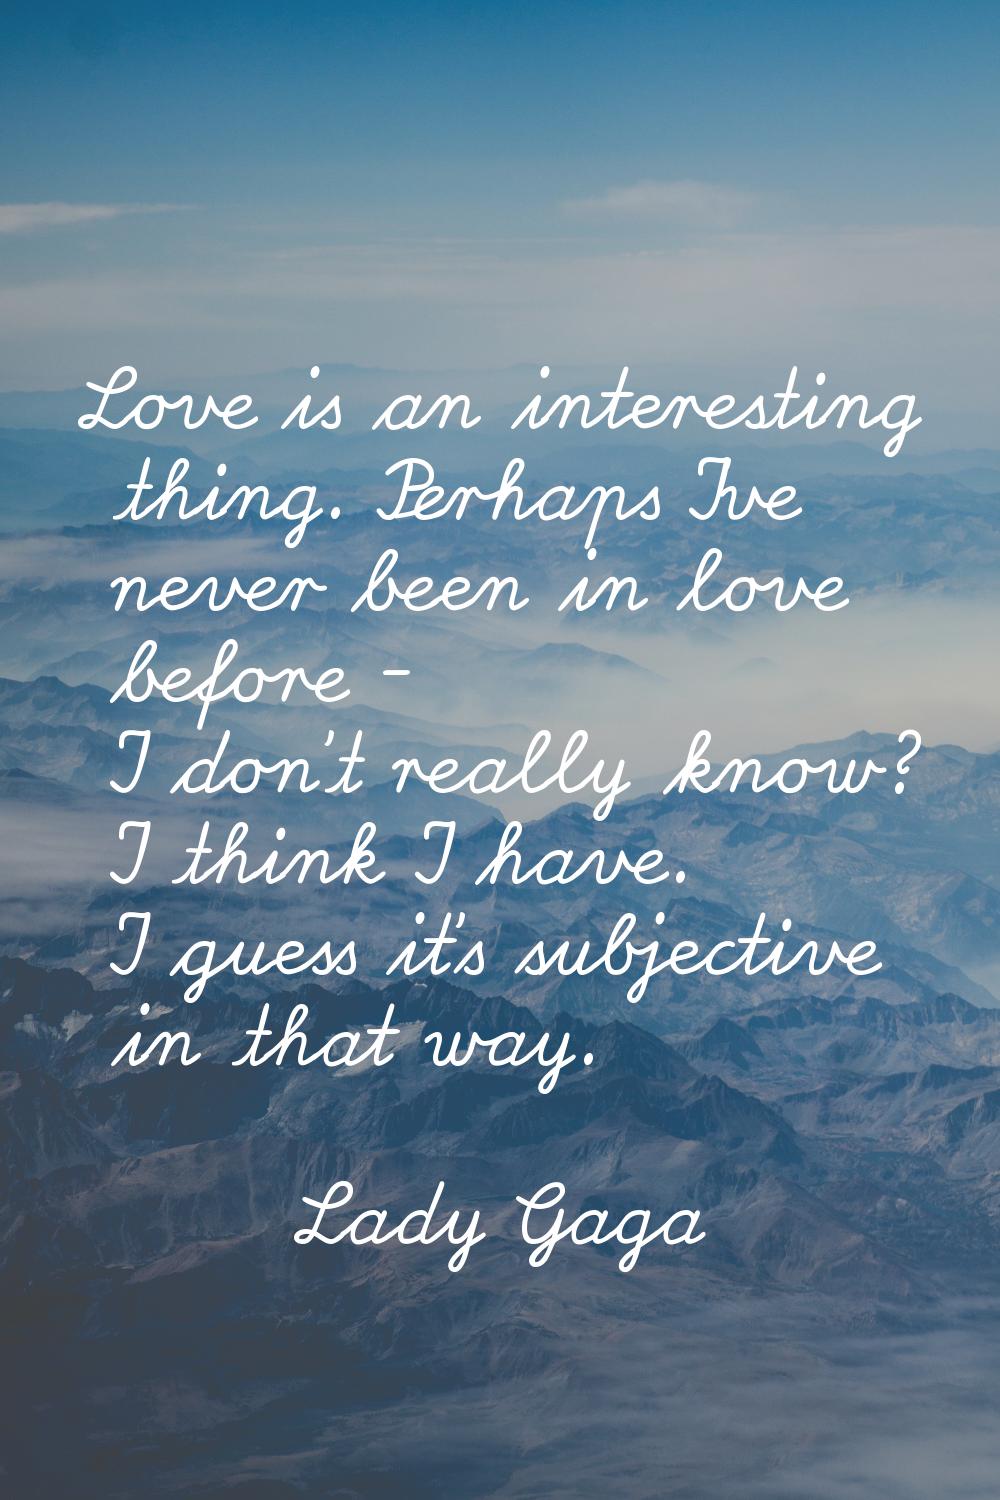 Love is an interesting thing. Perhaps I've never been in love before - I don't really know? I think